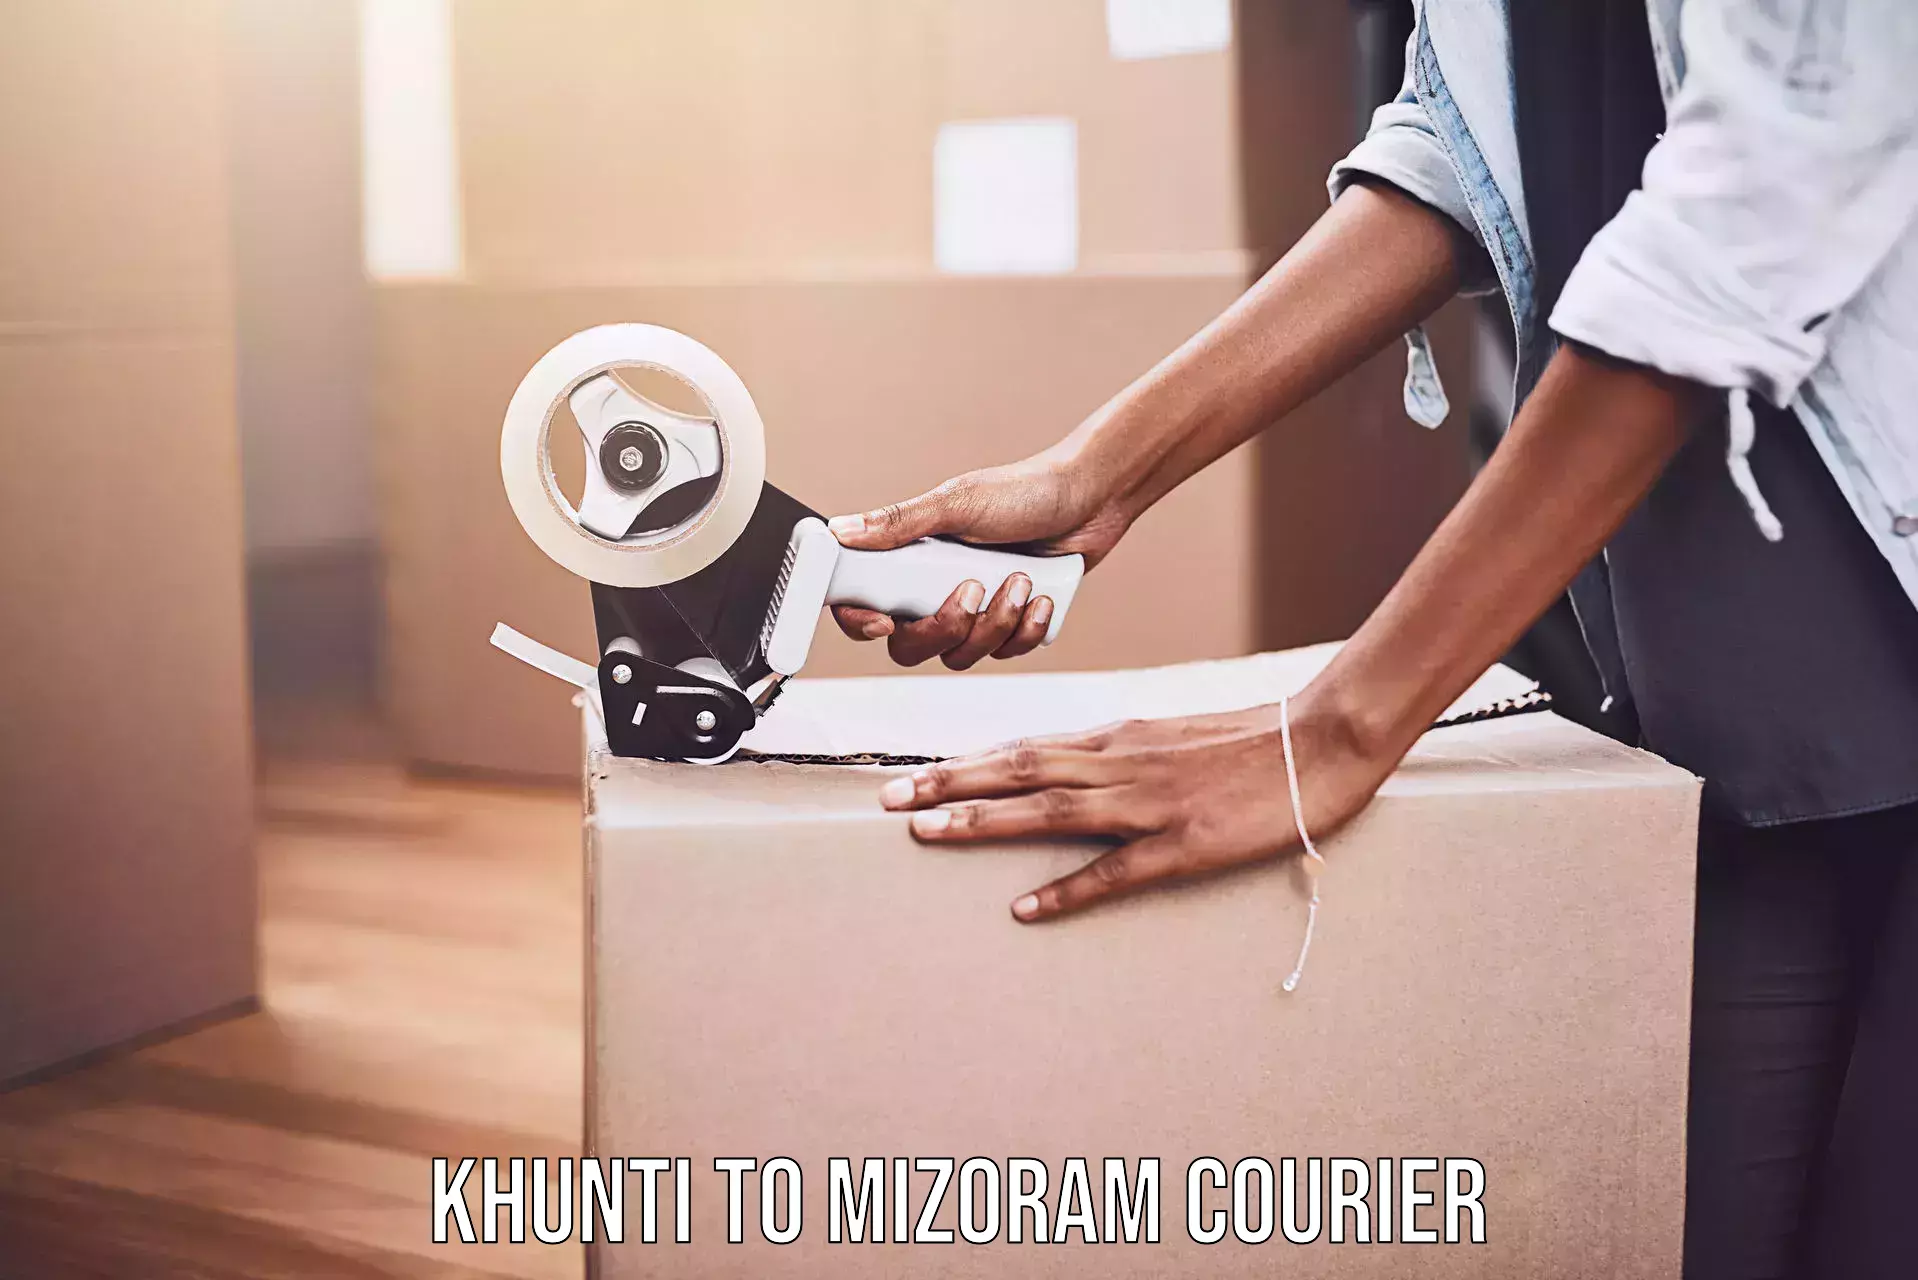 Cash on delivery service Khunti to Mizoram